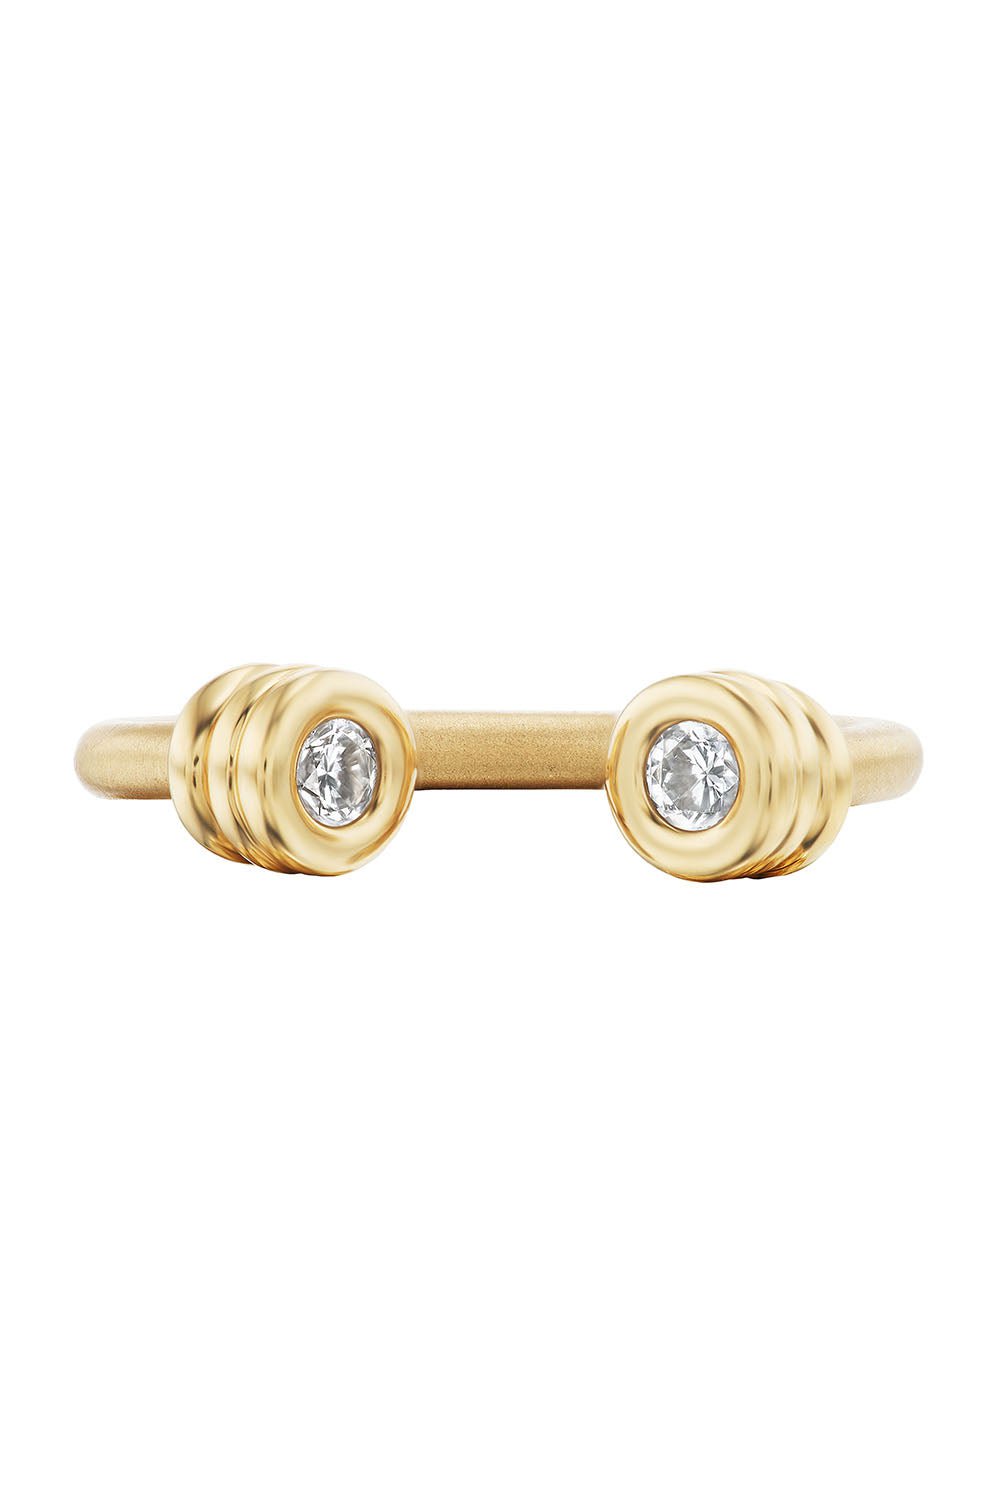 BECK JEWELS-Open Grotto Diamond Ring-YELLOW GOLD